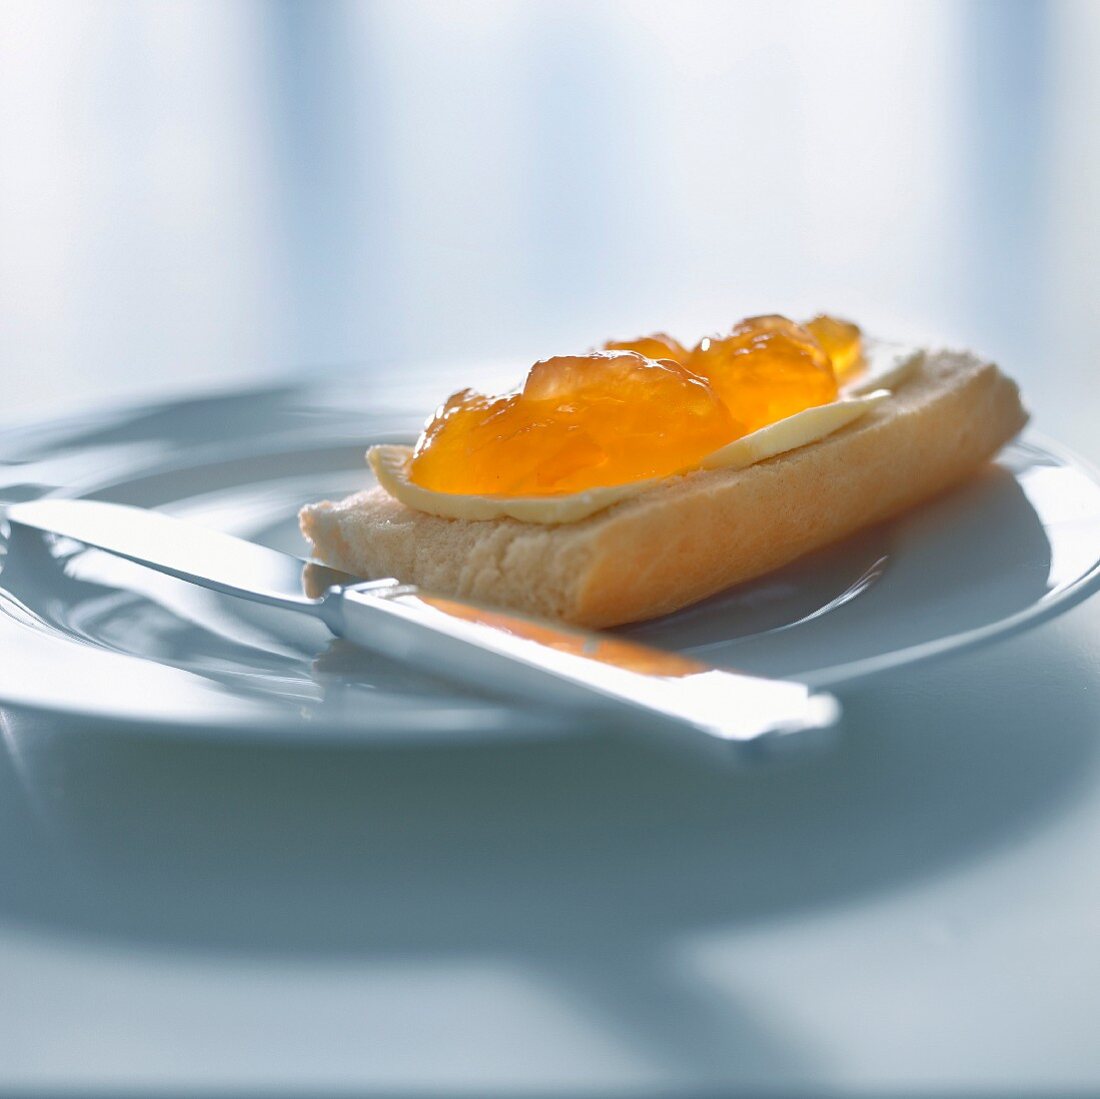 Marmalade on bread and butter